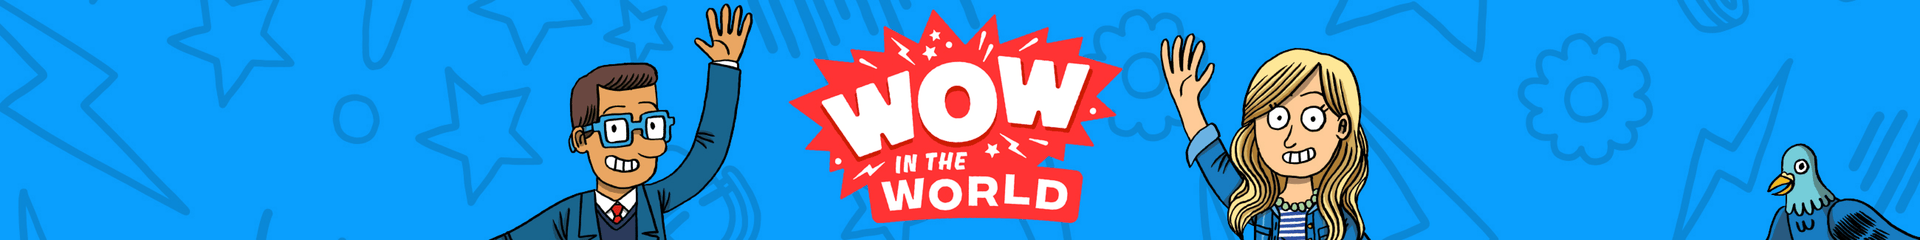 wow in the world podcast-image